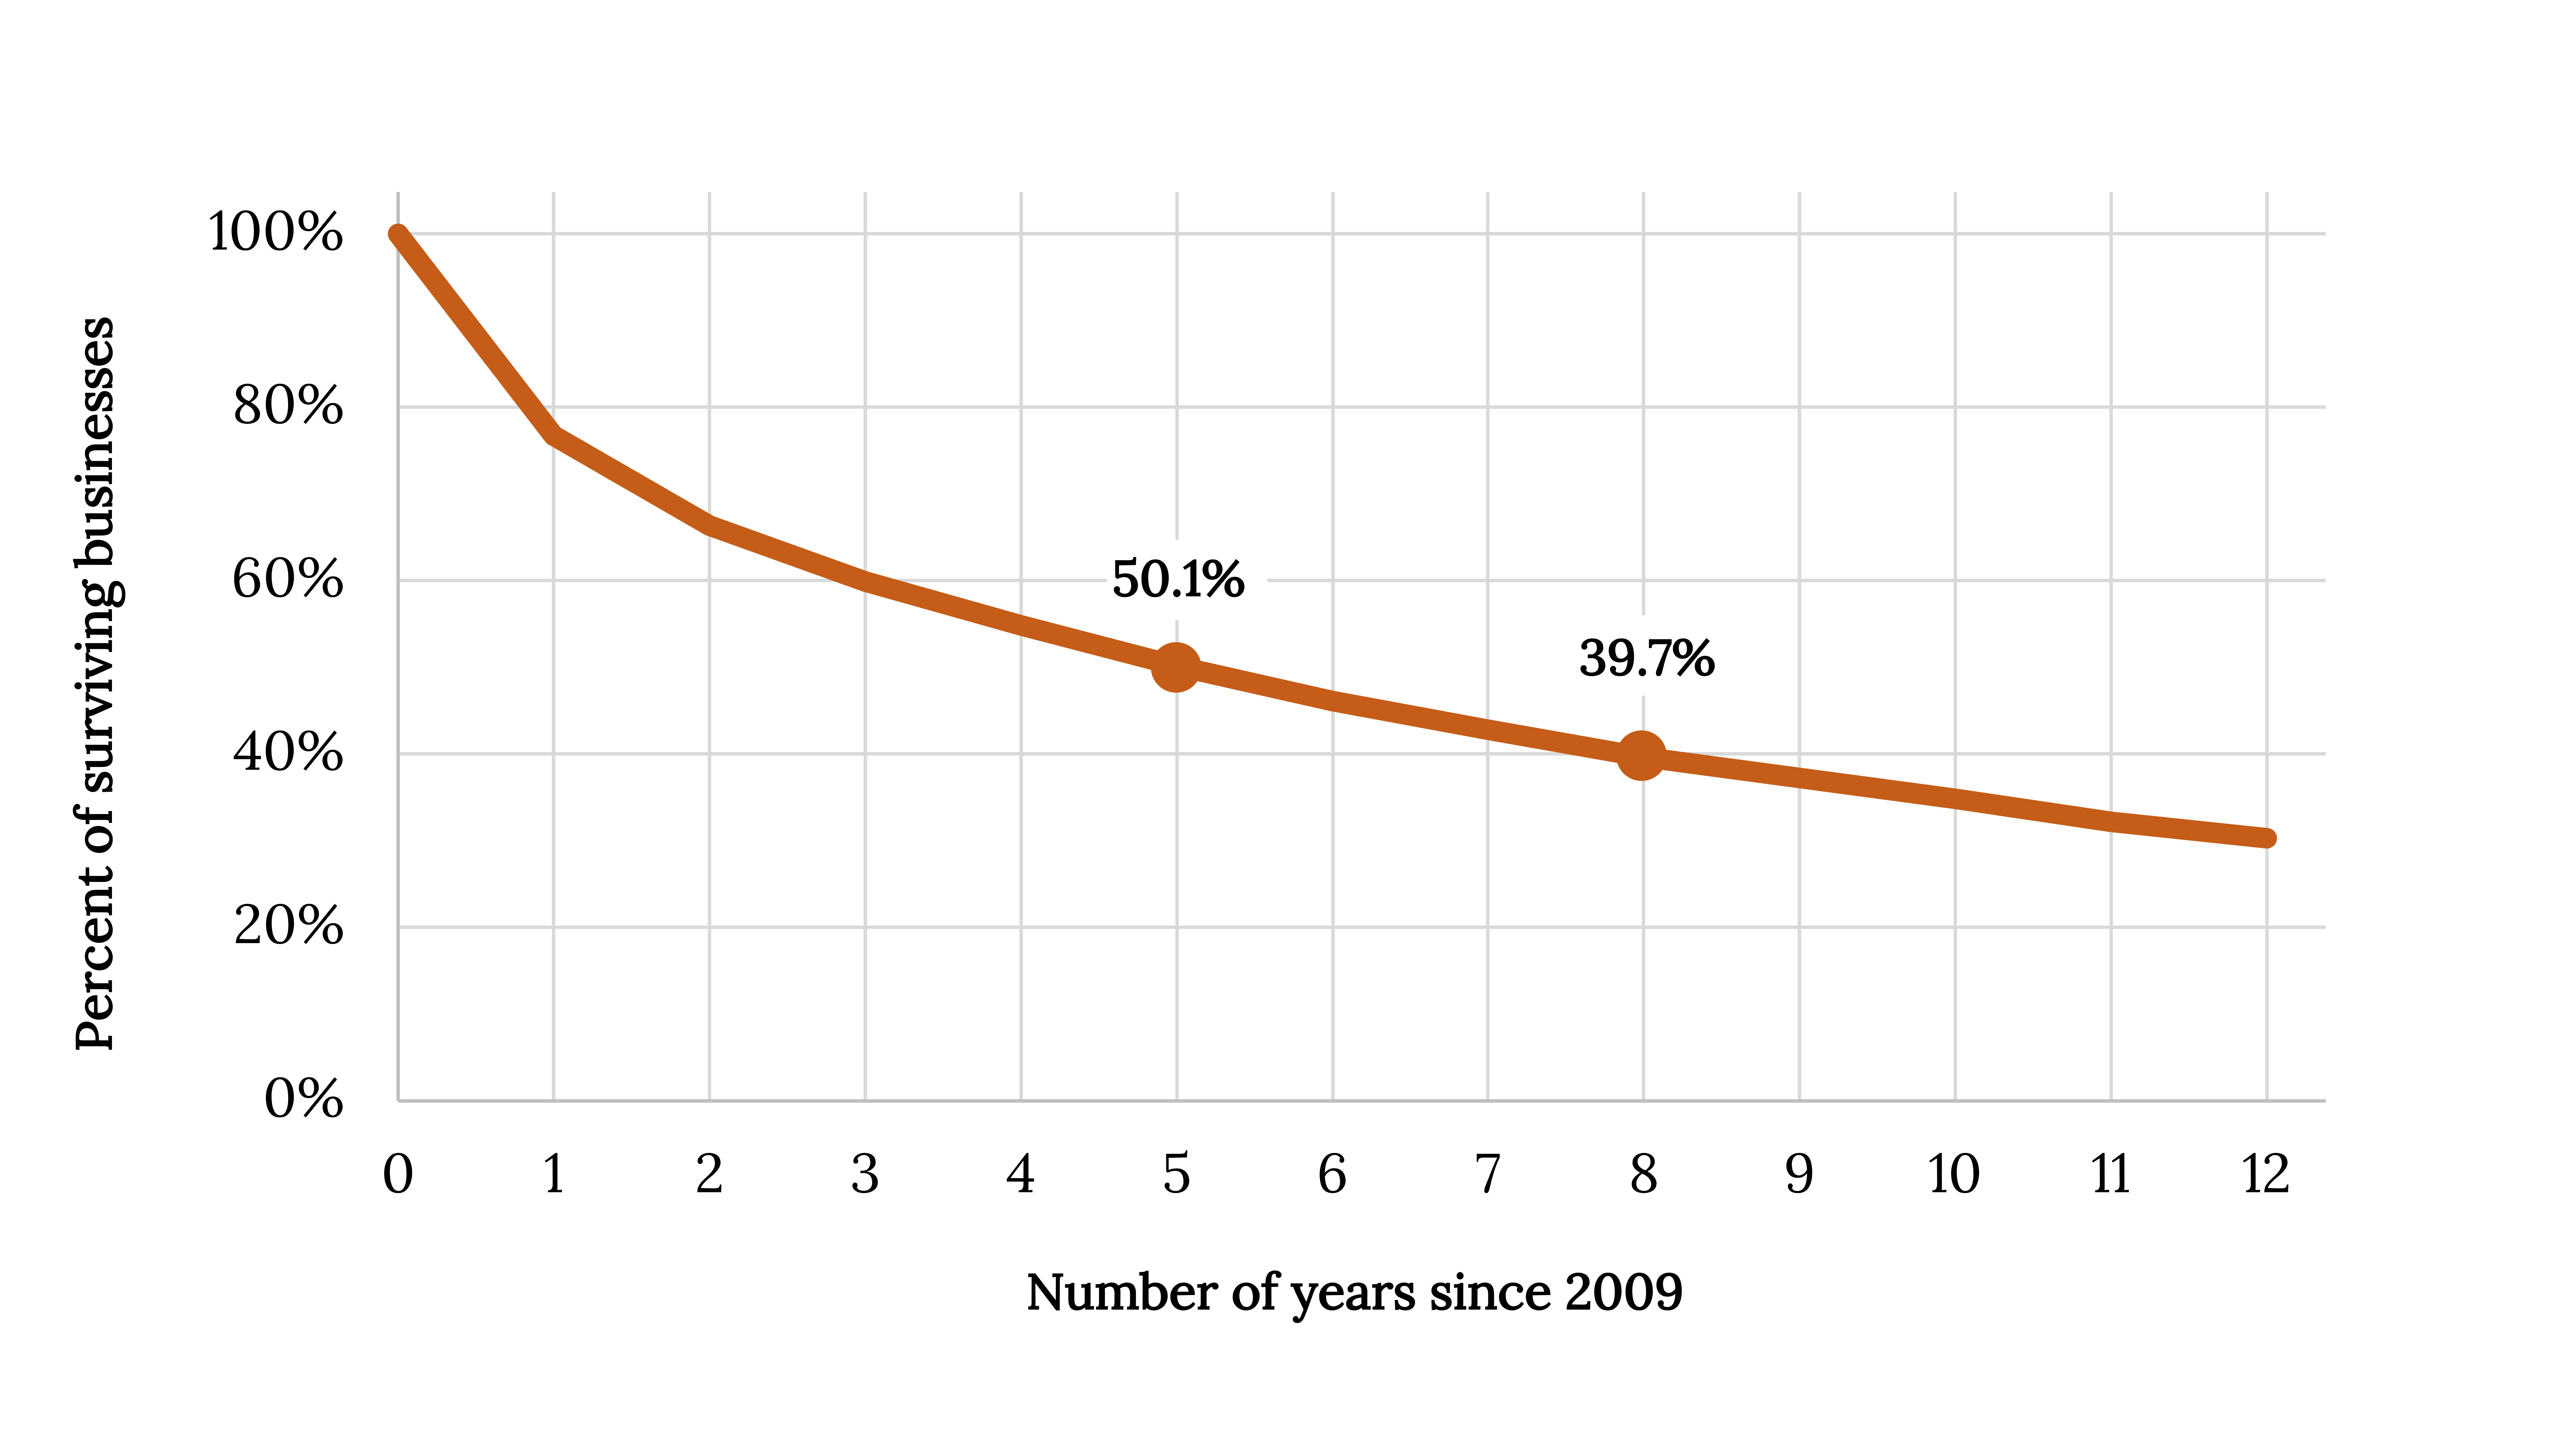 A line graph of the percentage of business survival rate over time. The x-axis shows the year, beginning from Year 0 to Year 12 in one year increments. The y-axis shows percentages from 0% to 100% in increments of 20%. At Year 0, the percentage is at 100%. By Year 5, the percentage has decreased to 50.1%. At Year 8, the percentage has decreased to 39.7%, and it keeps declining until Year 12, where it is around 30%.